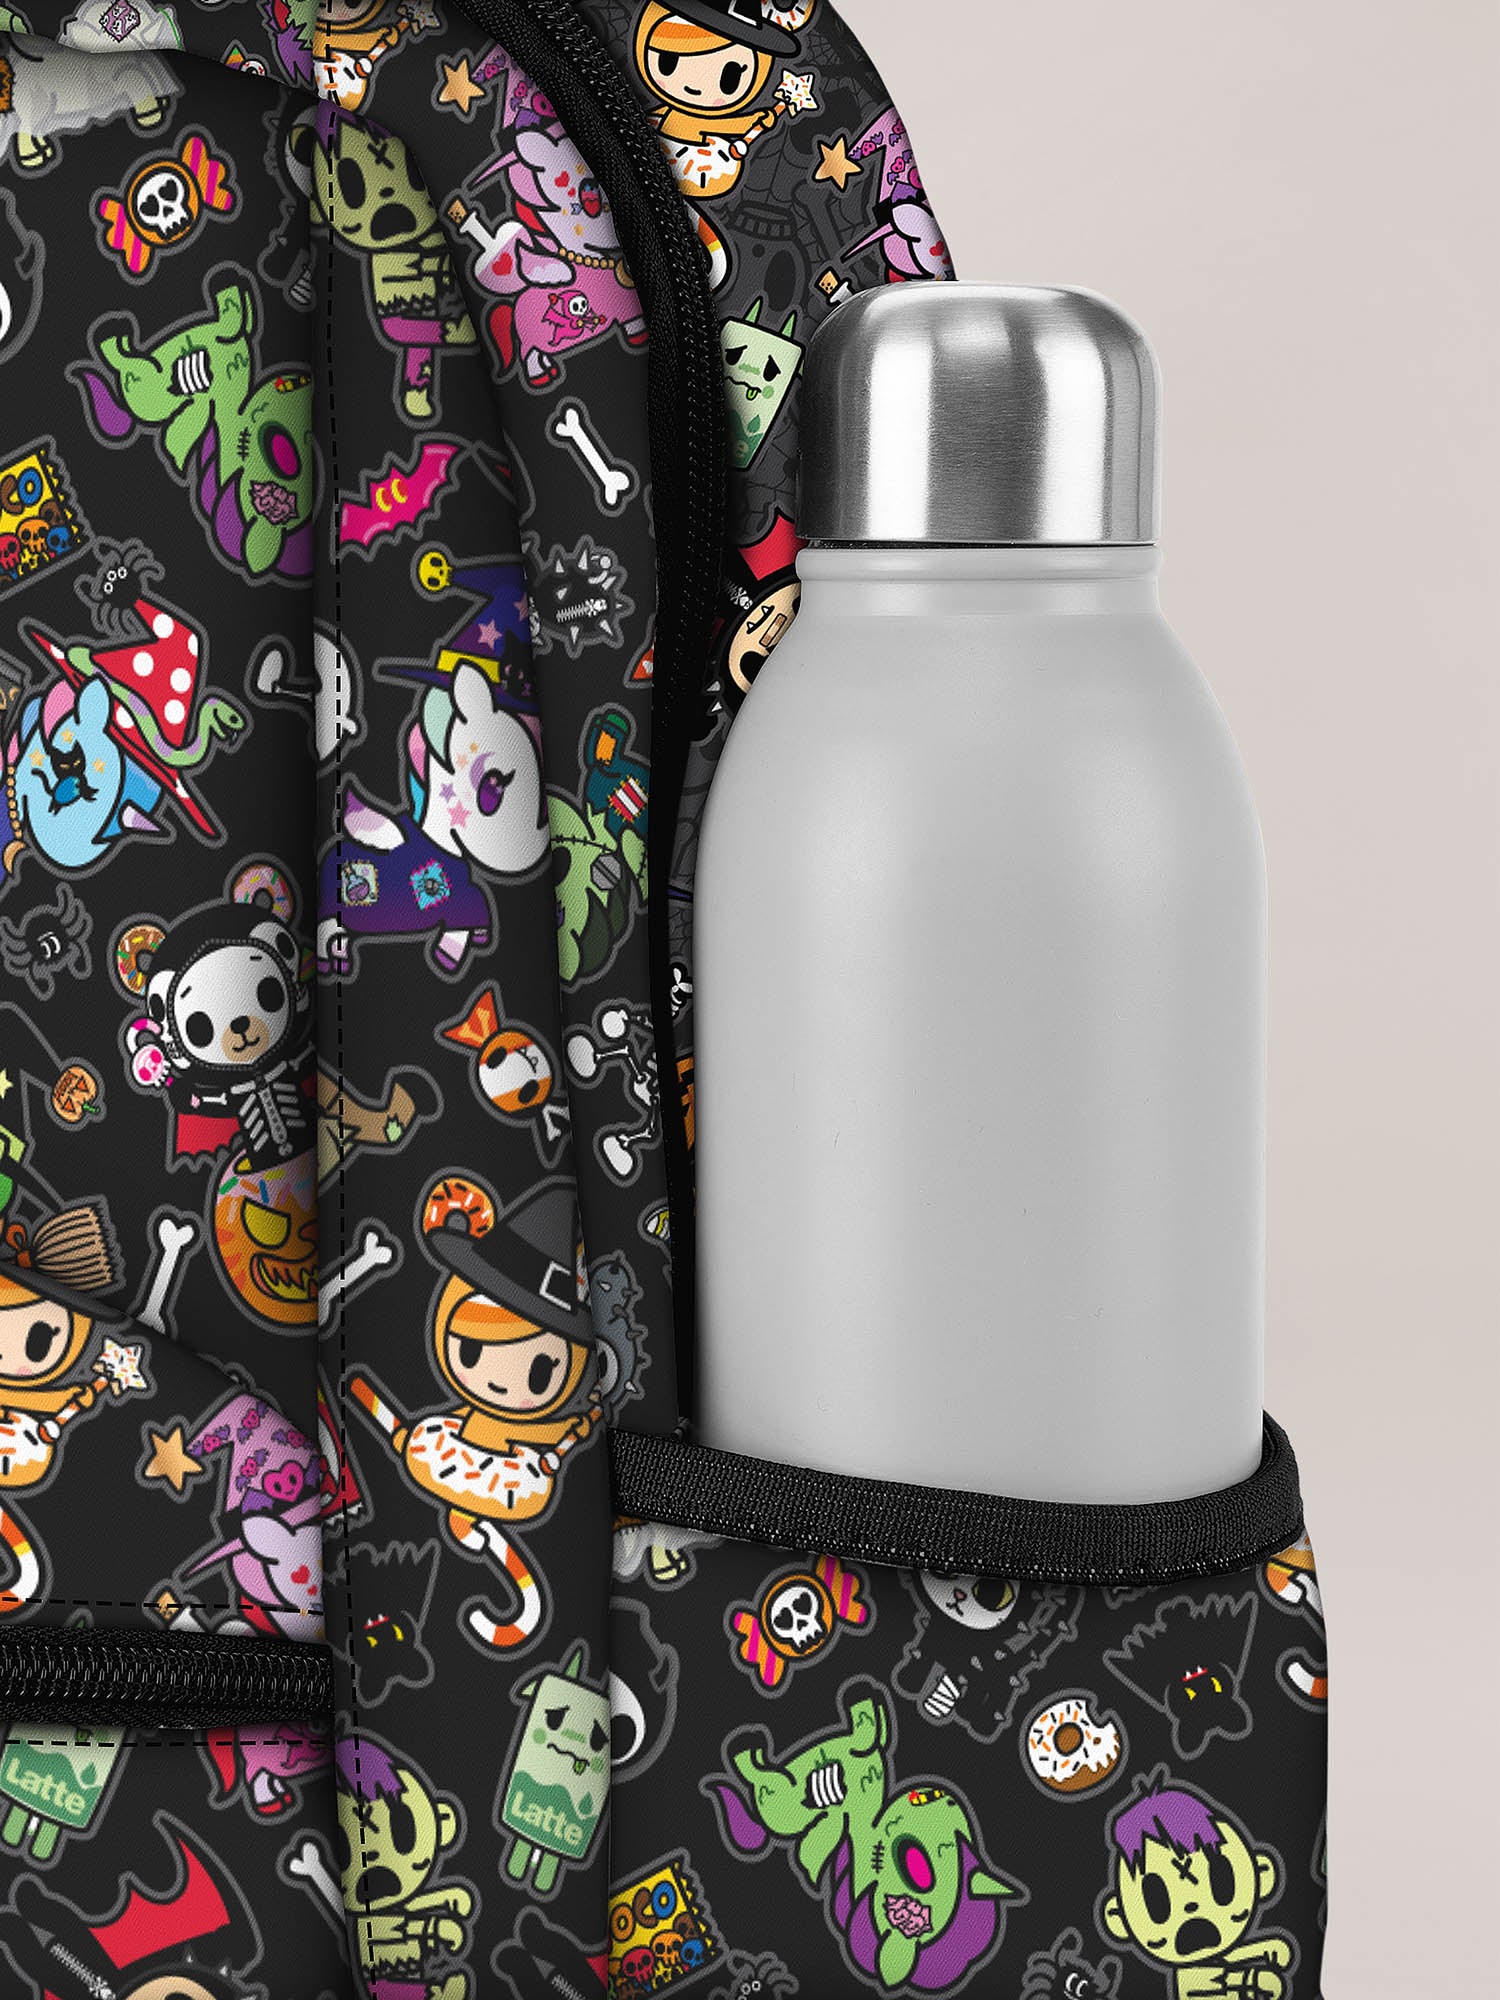 Tokidoki Spooktacular Print: Vibrant Halloween-themed design featuring whimsical characters on a black background